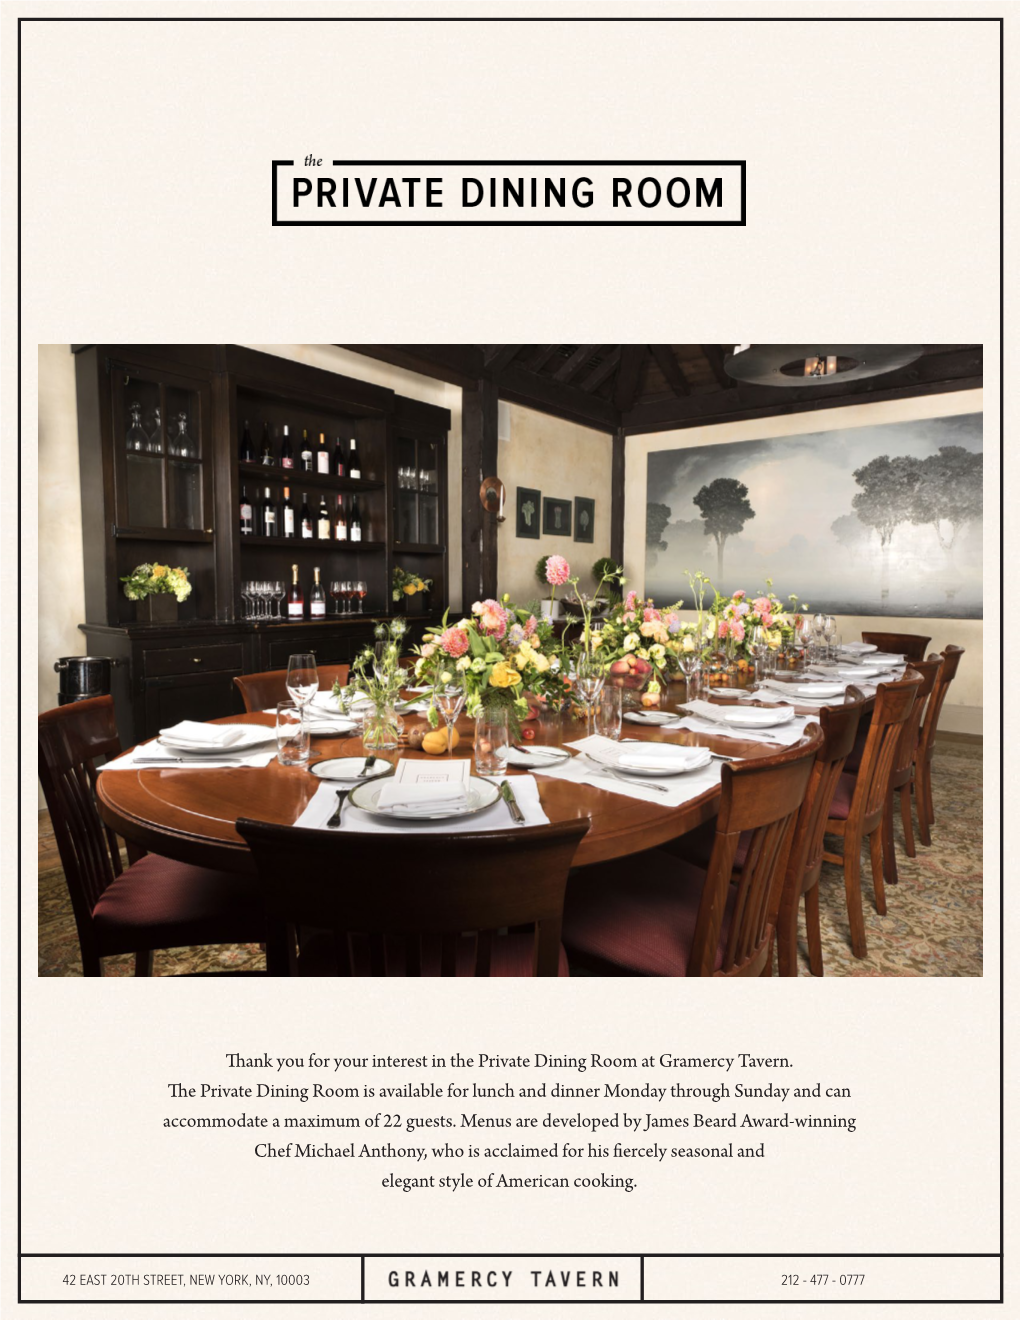 Thank You for Your Interest in the Private Dining Room at Gramercy Tavern